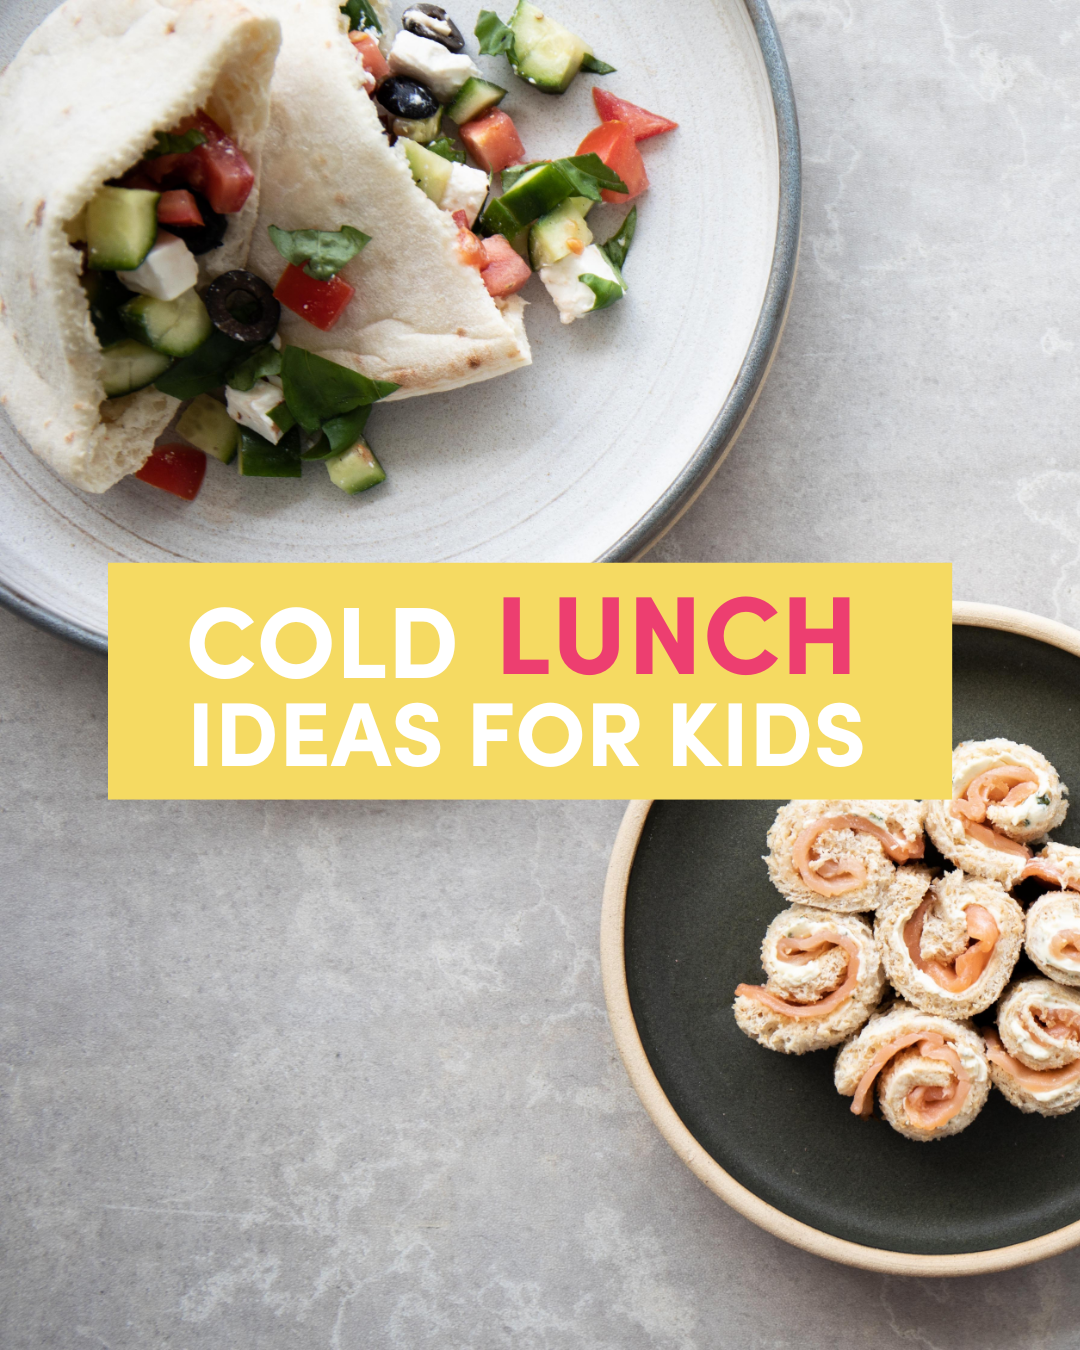 Cold Lunch Ideas for Kids to Eat at Room Temperature